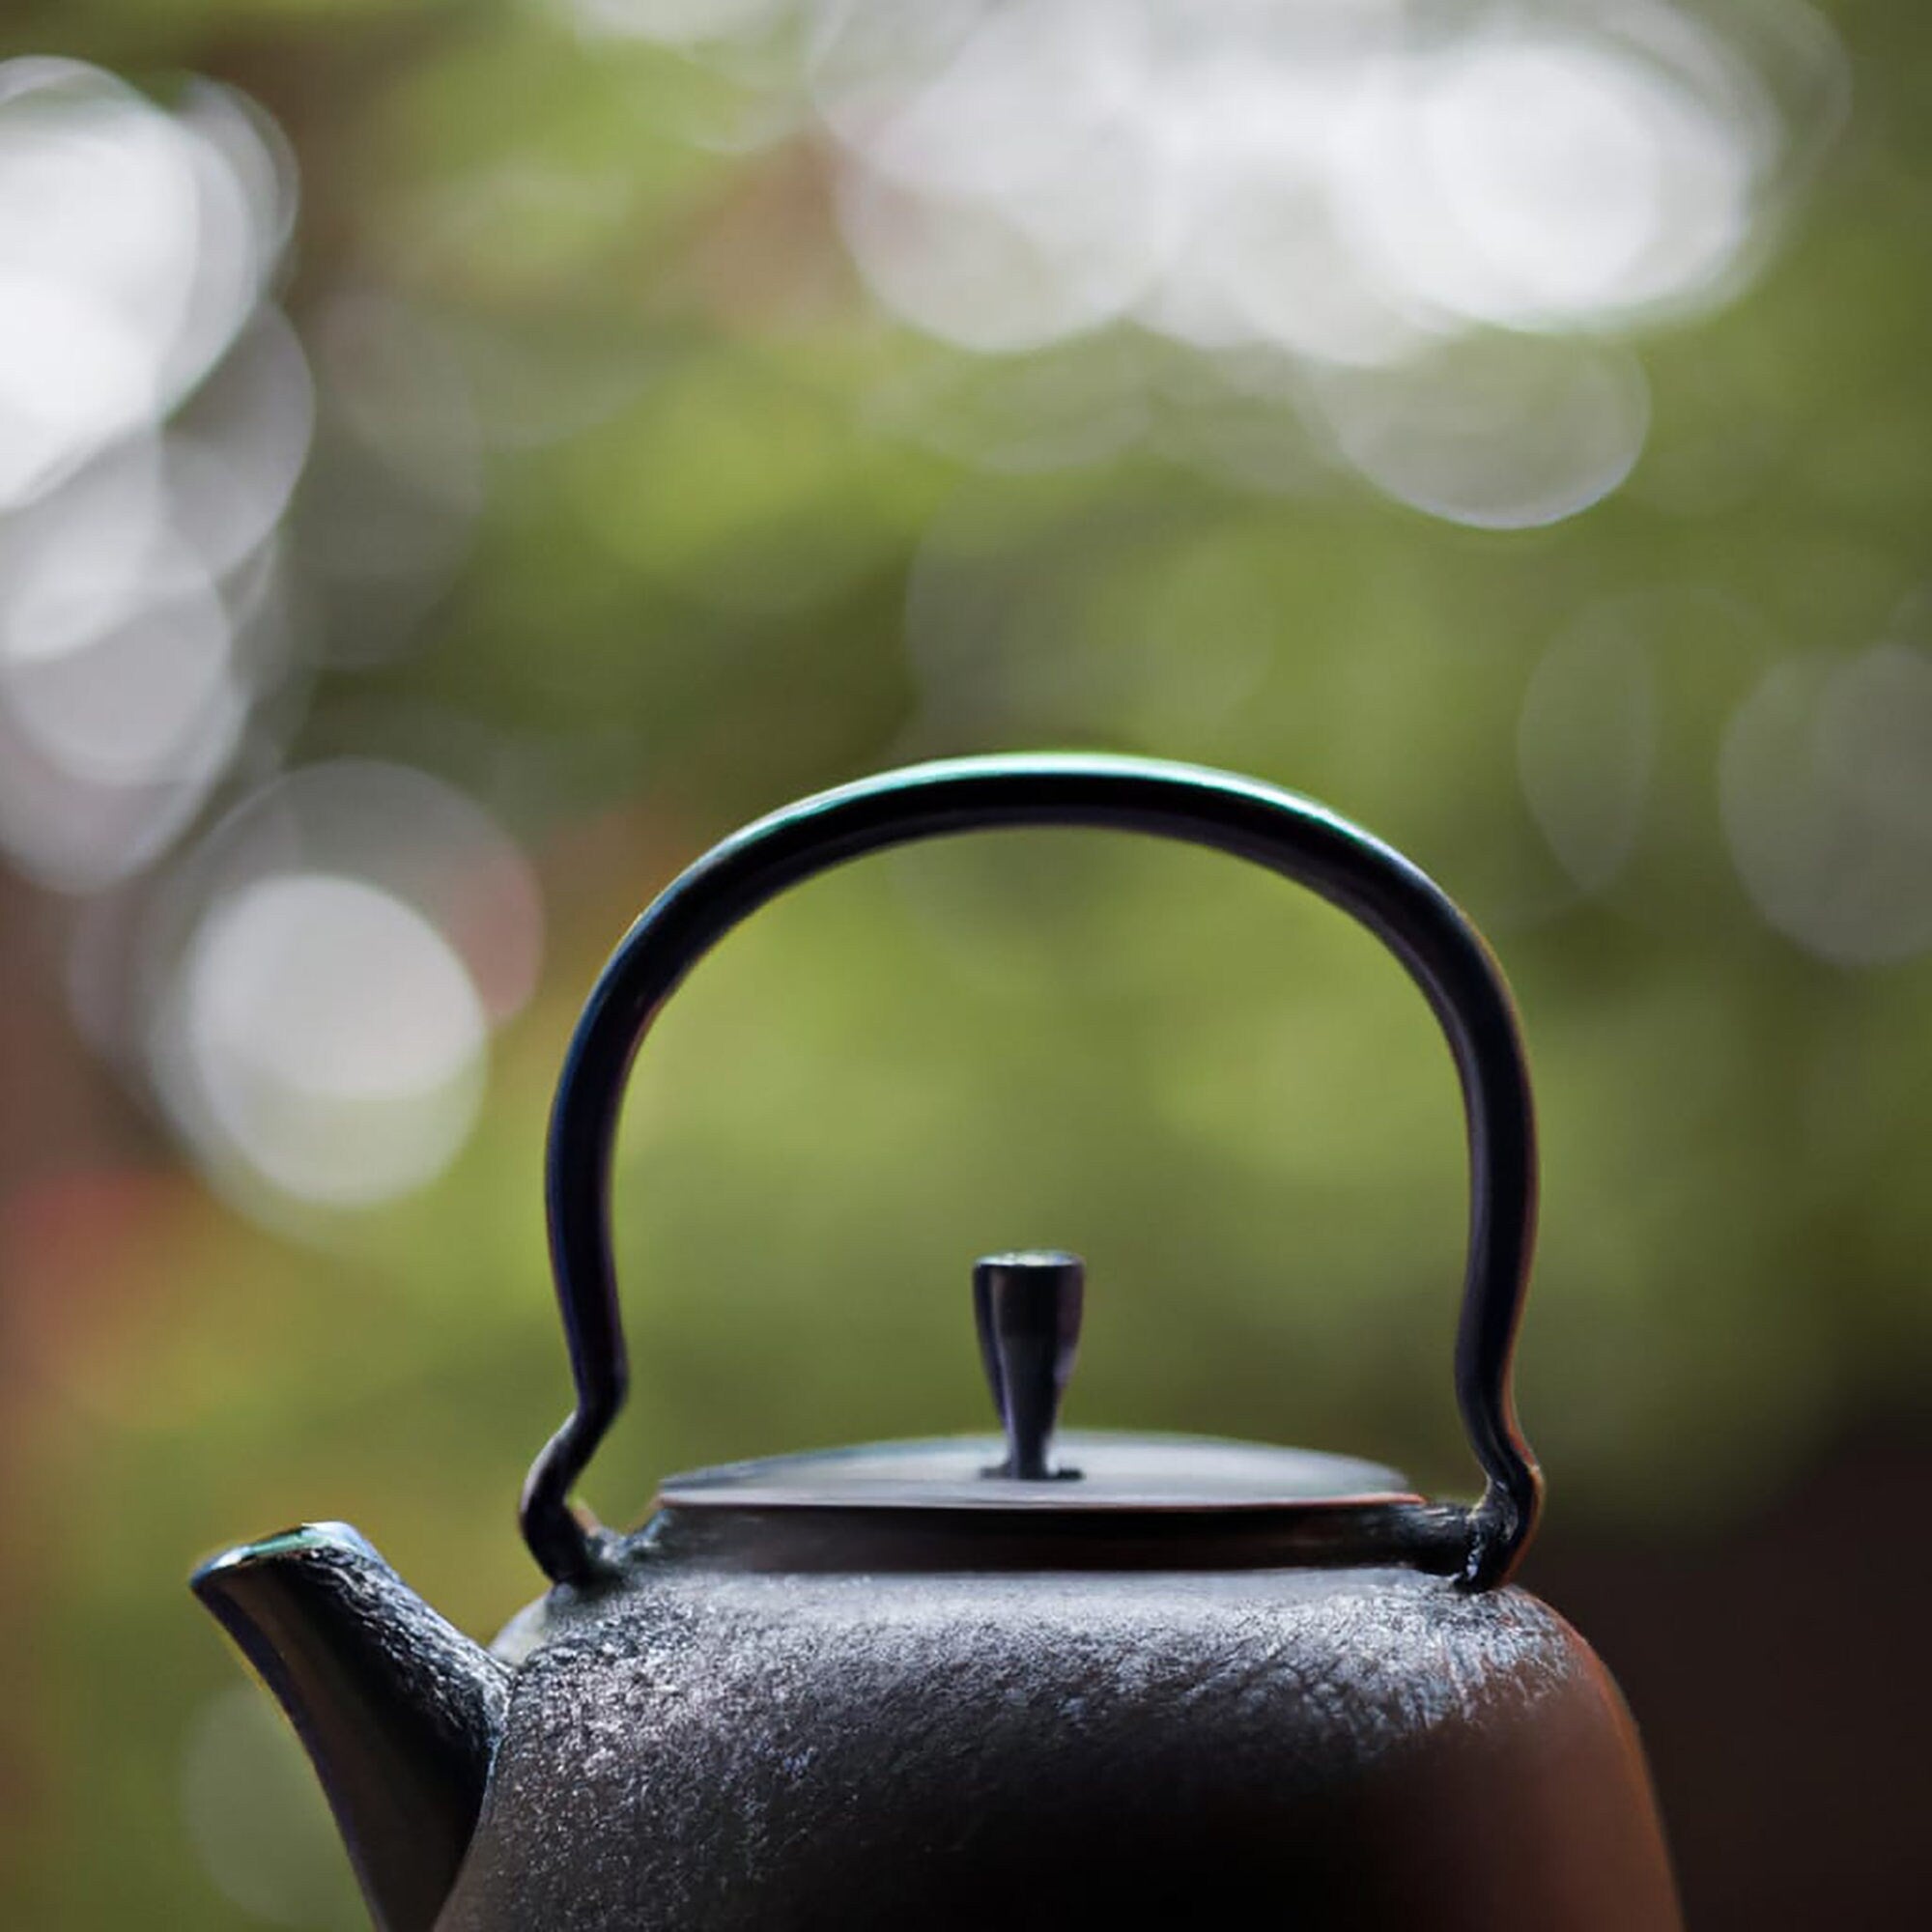 A classic cast iron teapot, the perfect vessel for steeping loose leaf green tea, set against a blurred natural background.